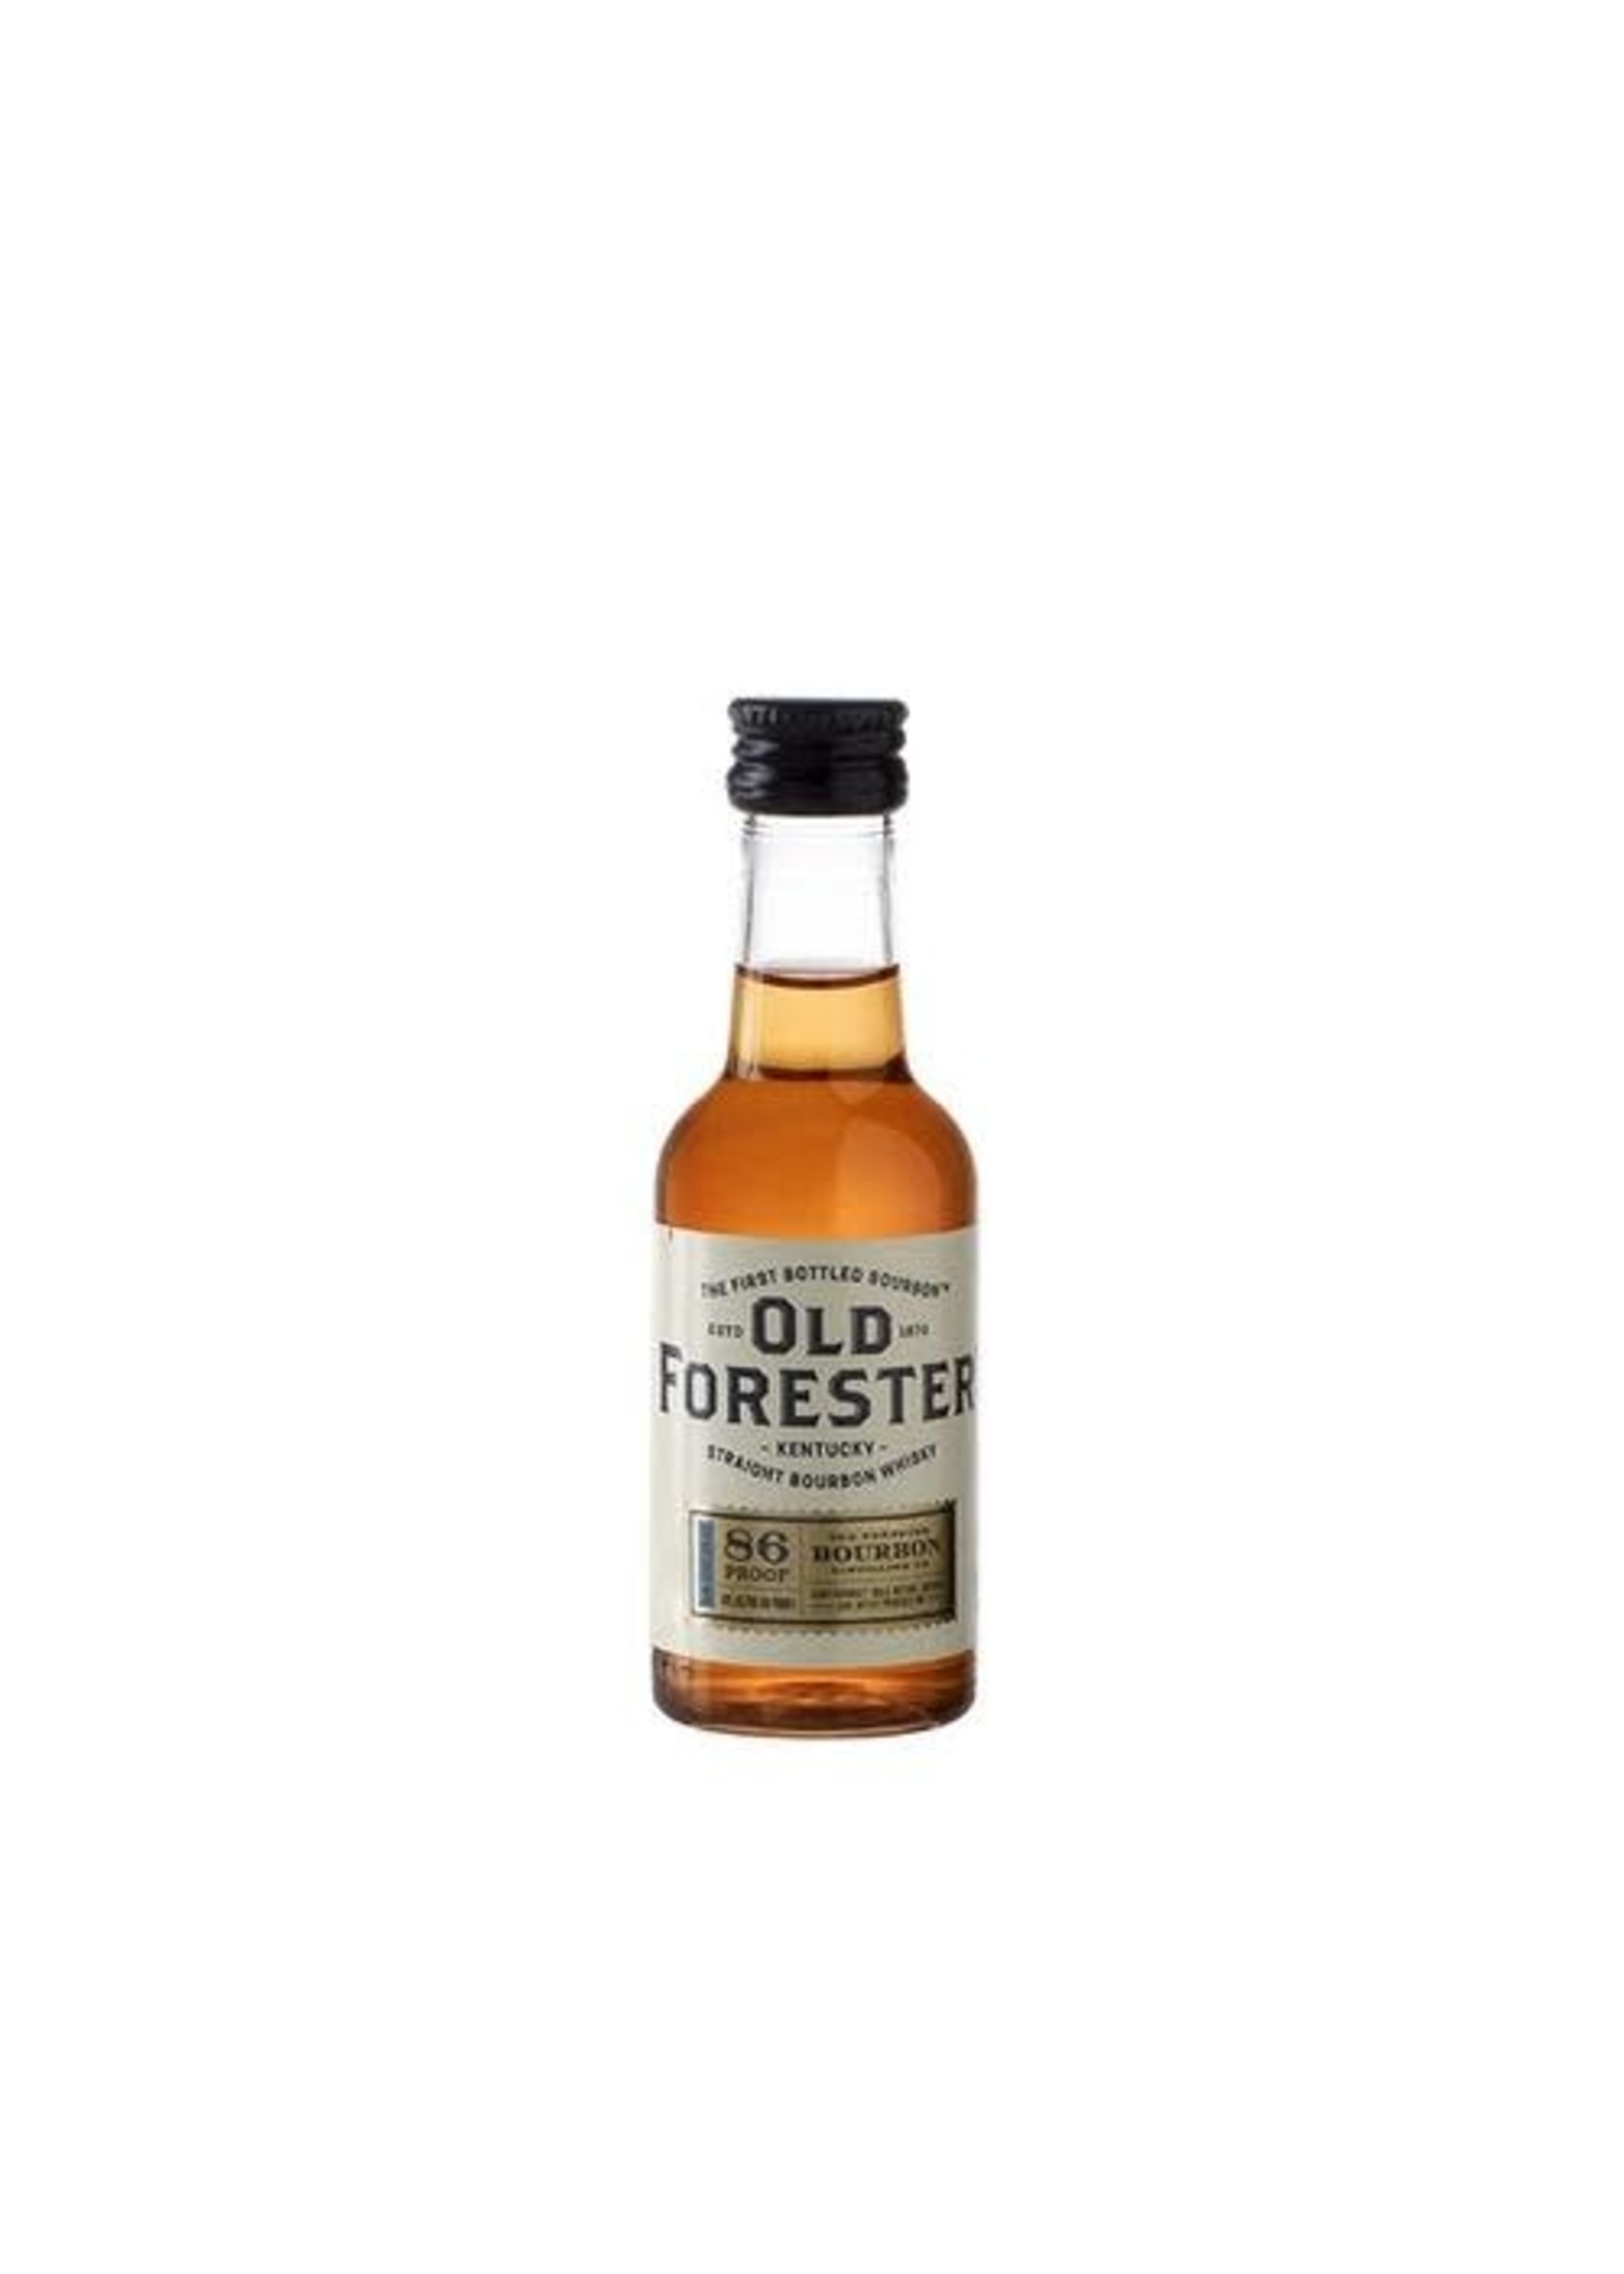 Old Forester Old Forester / Bourbon Whiskey 86 Proof